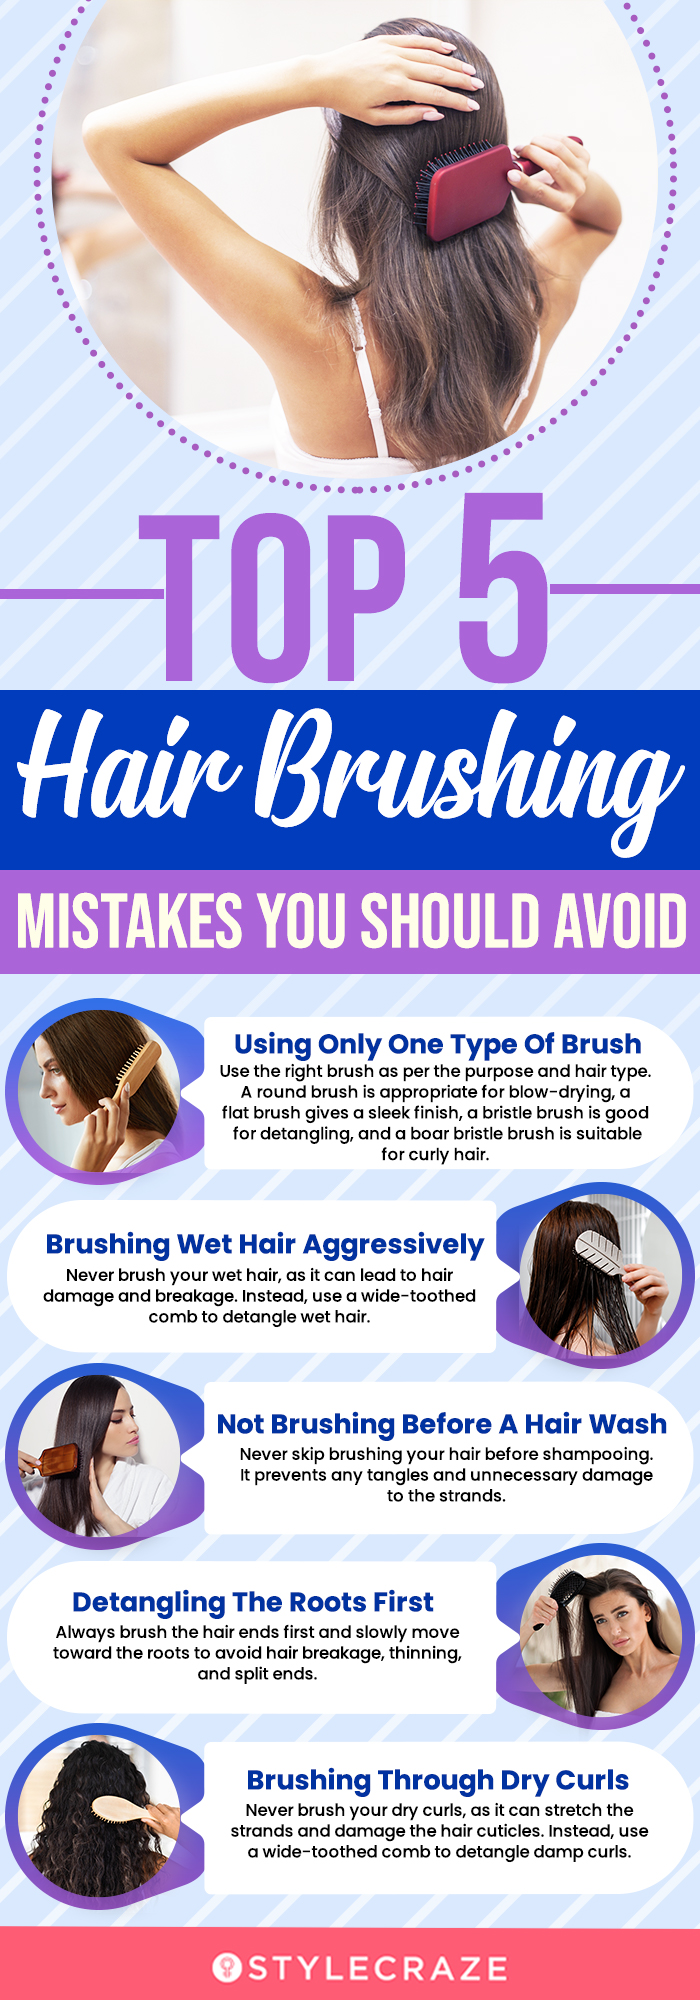 top 5 hair brushing mistakes you should avoid (infographic)